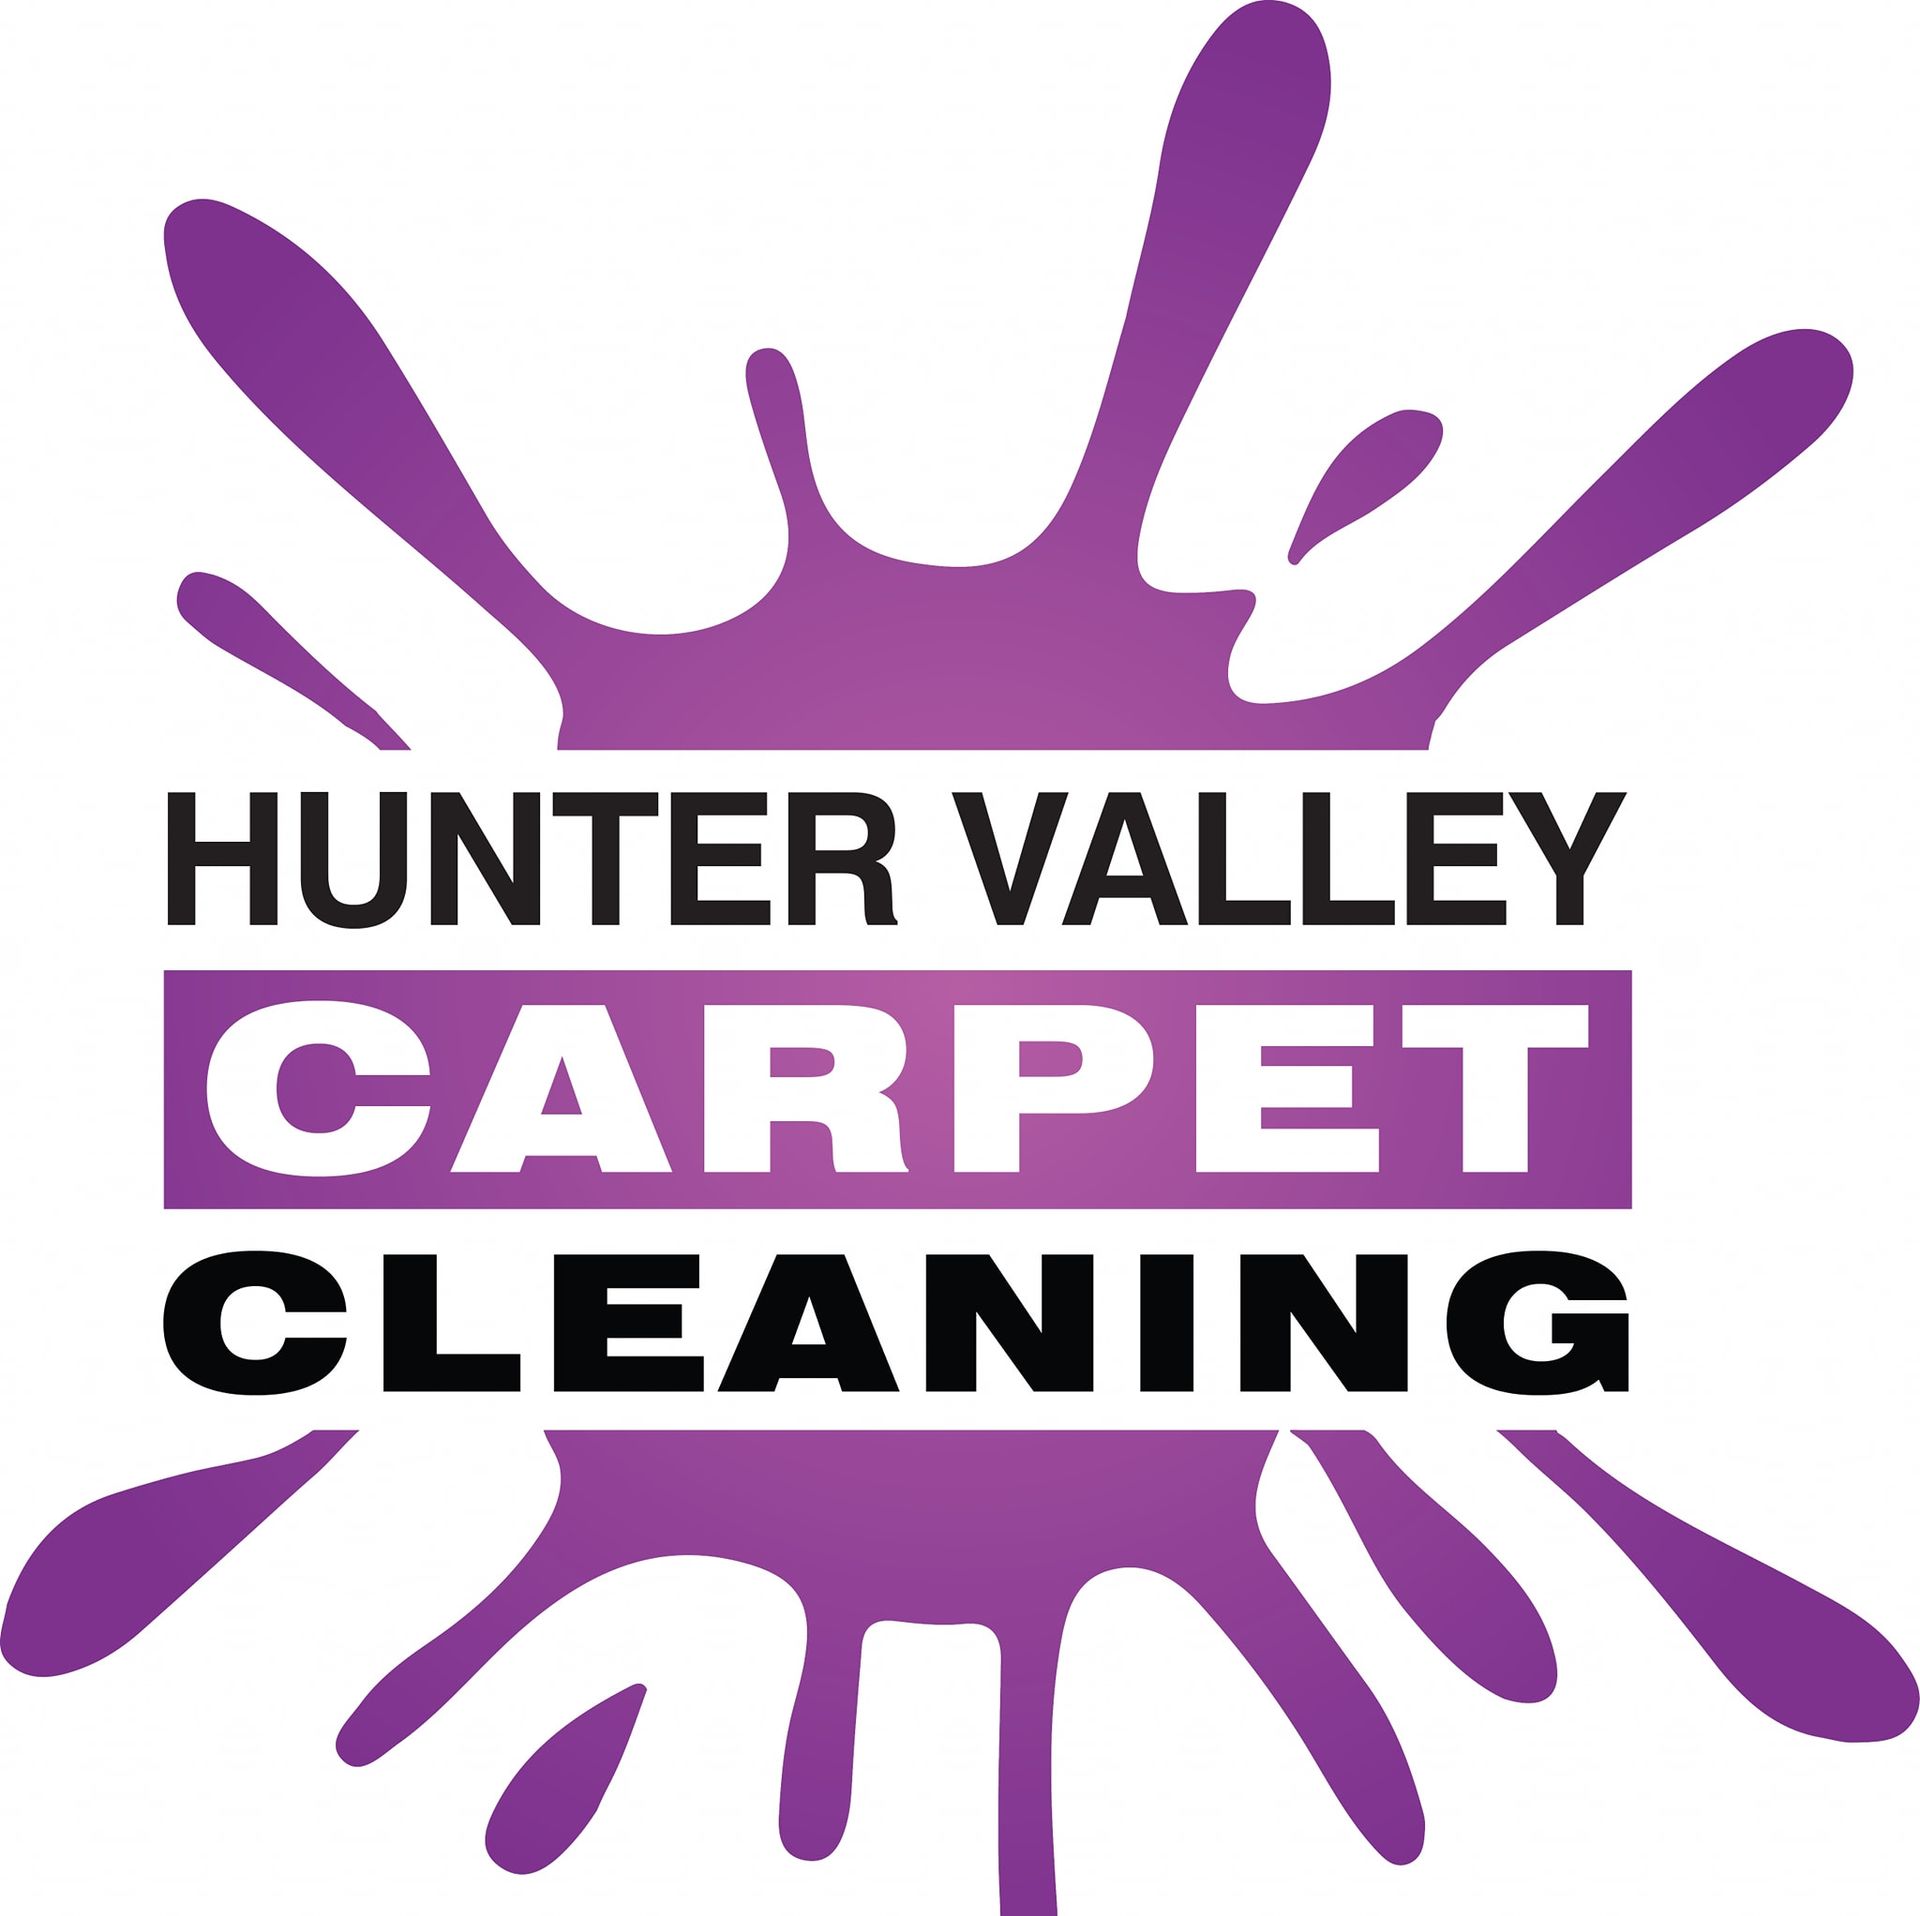 Hunter Valley Carpet Cleaning: Your Premium Cleaning Service In Maitland